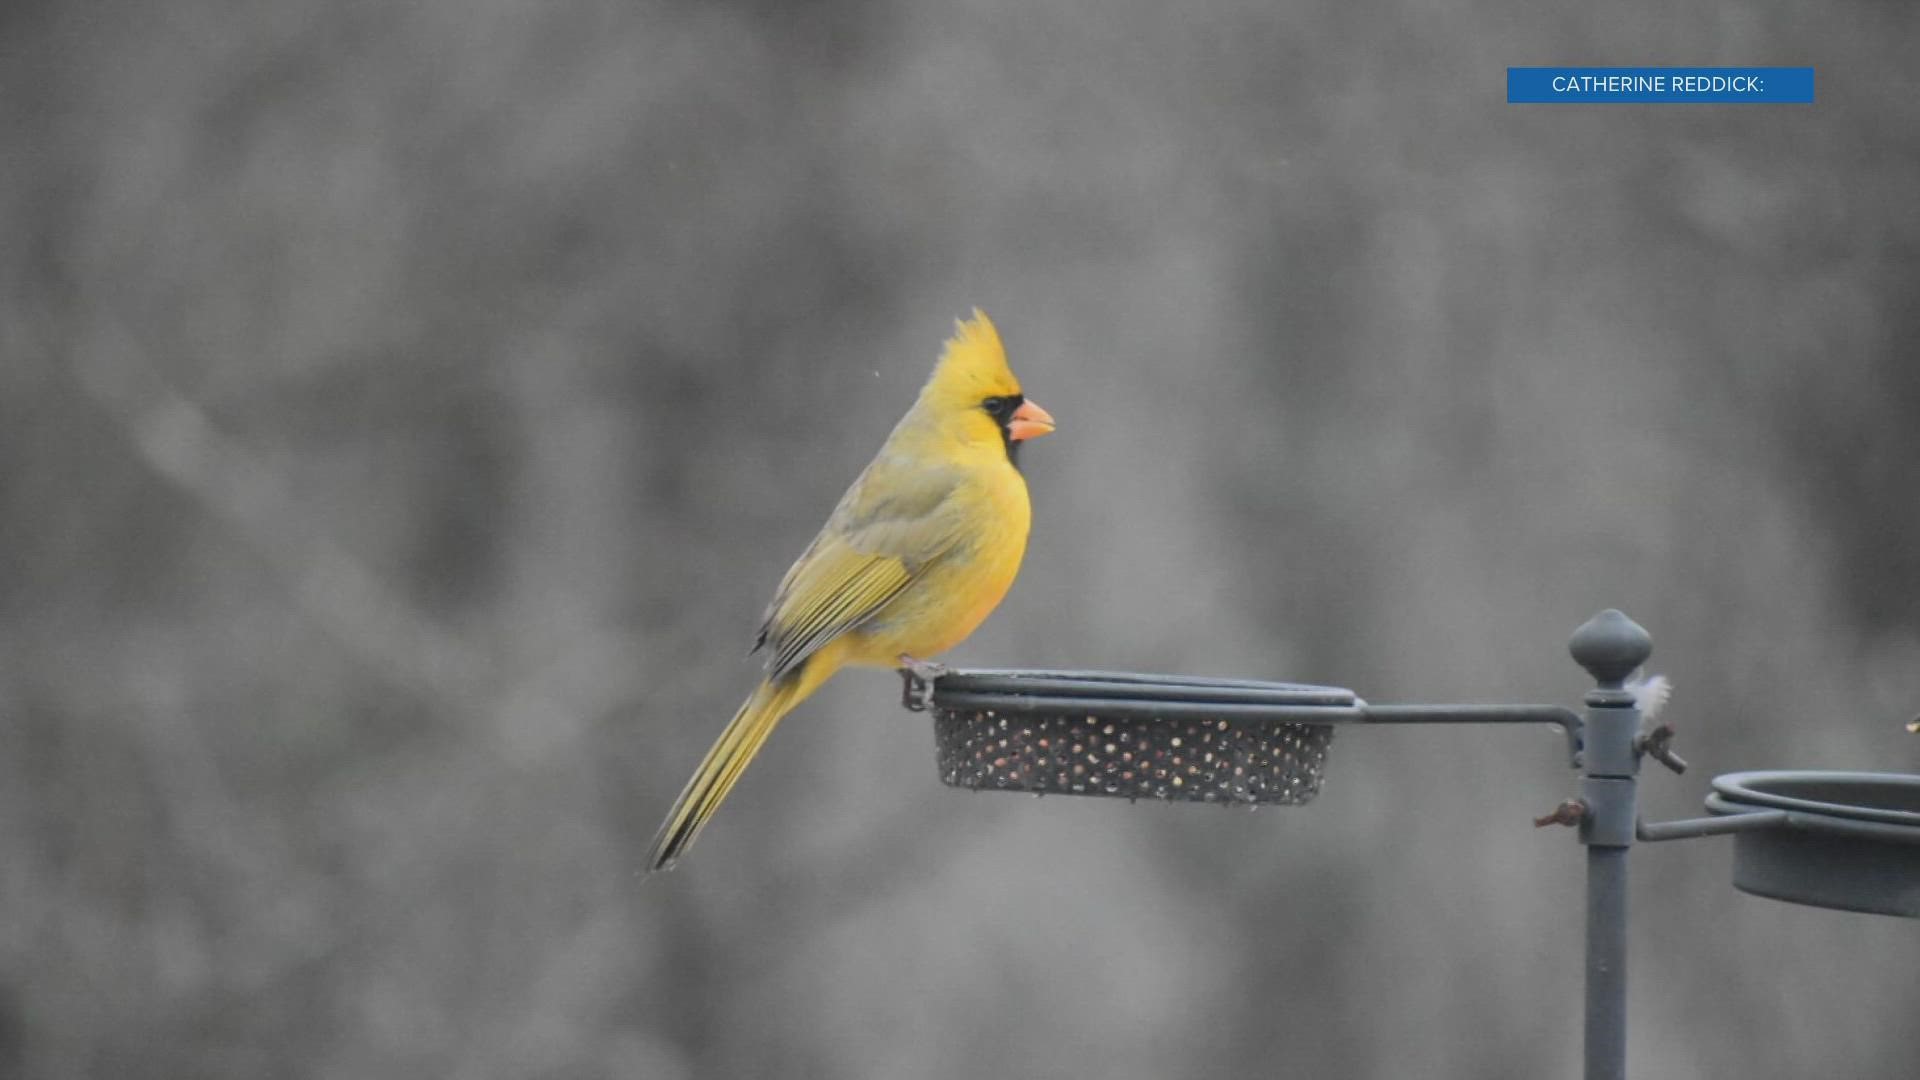 The one-in-a-million sighting actually happens pretty regularly at one Harriman family's backyard birdfeeder!